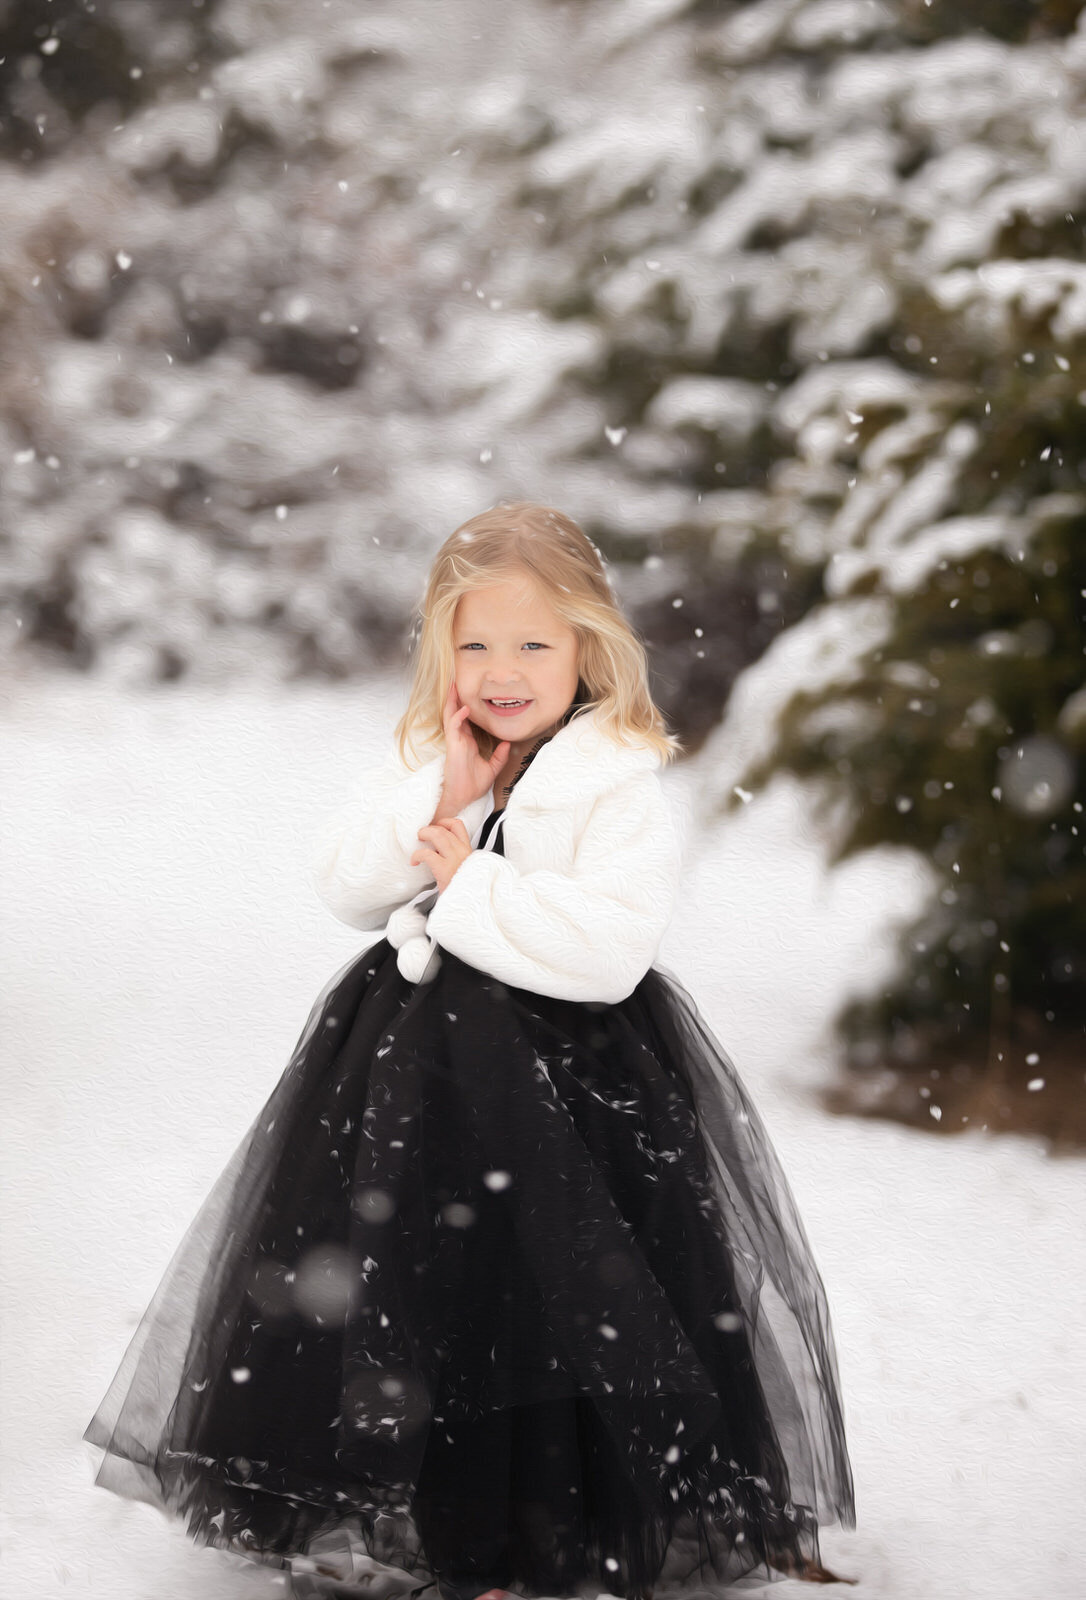 snow-in-texas-portrait-with-girl-in-black-dress